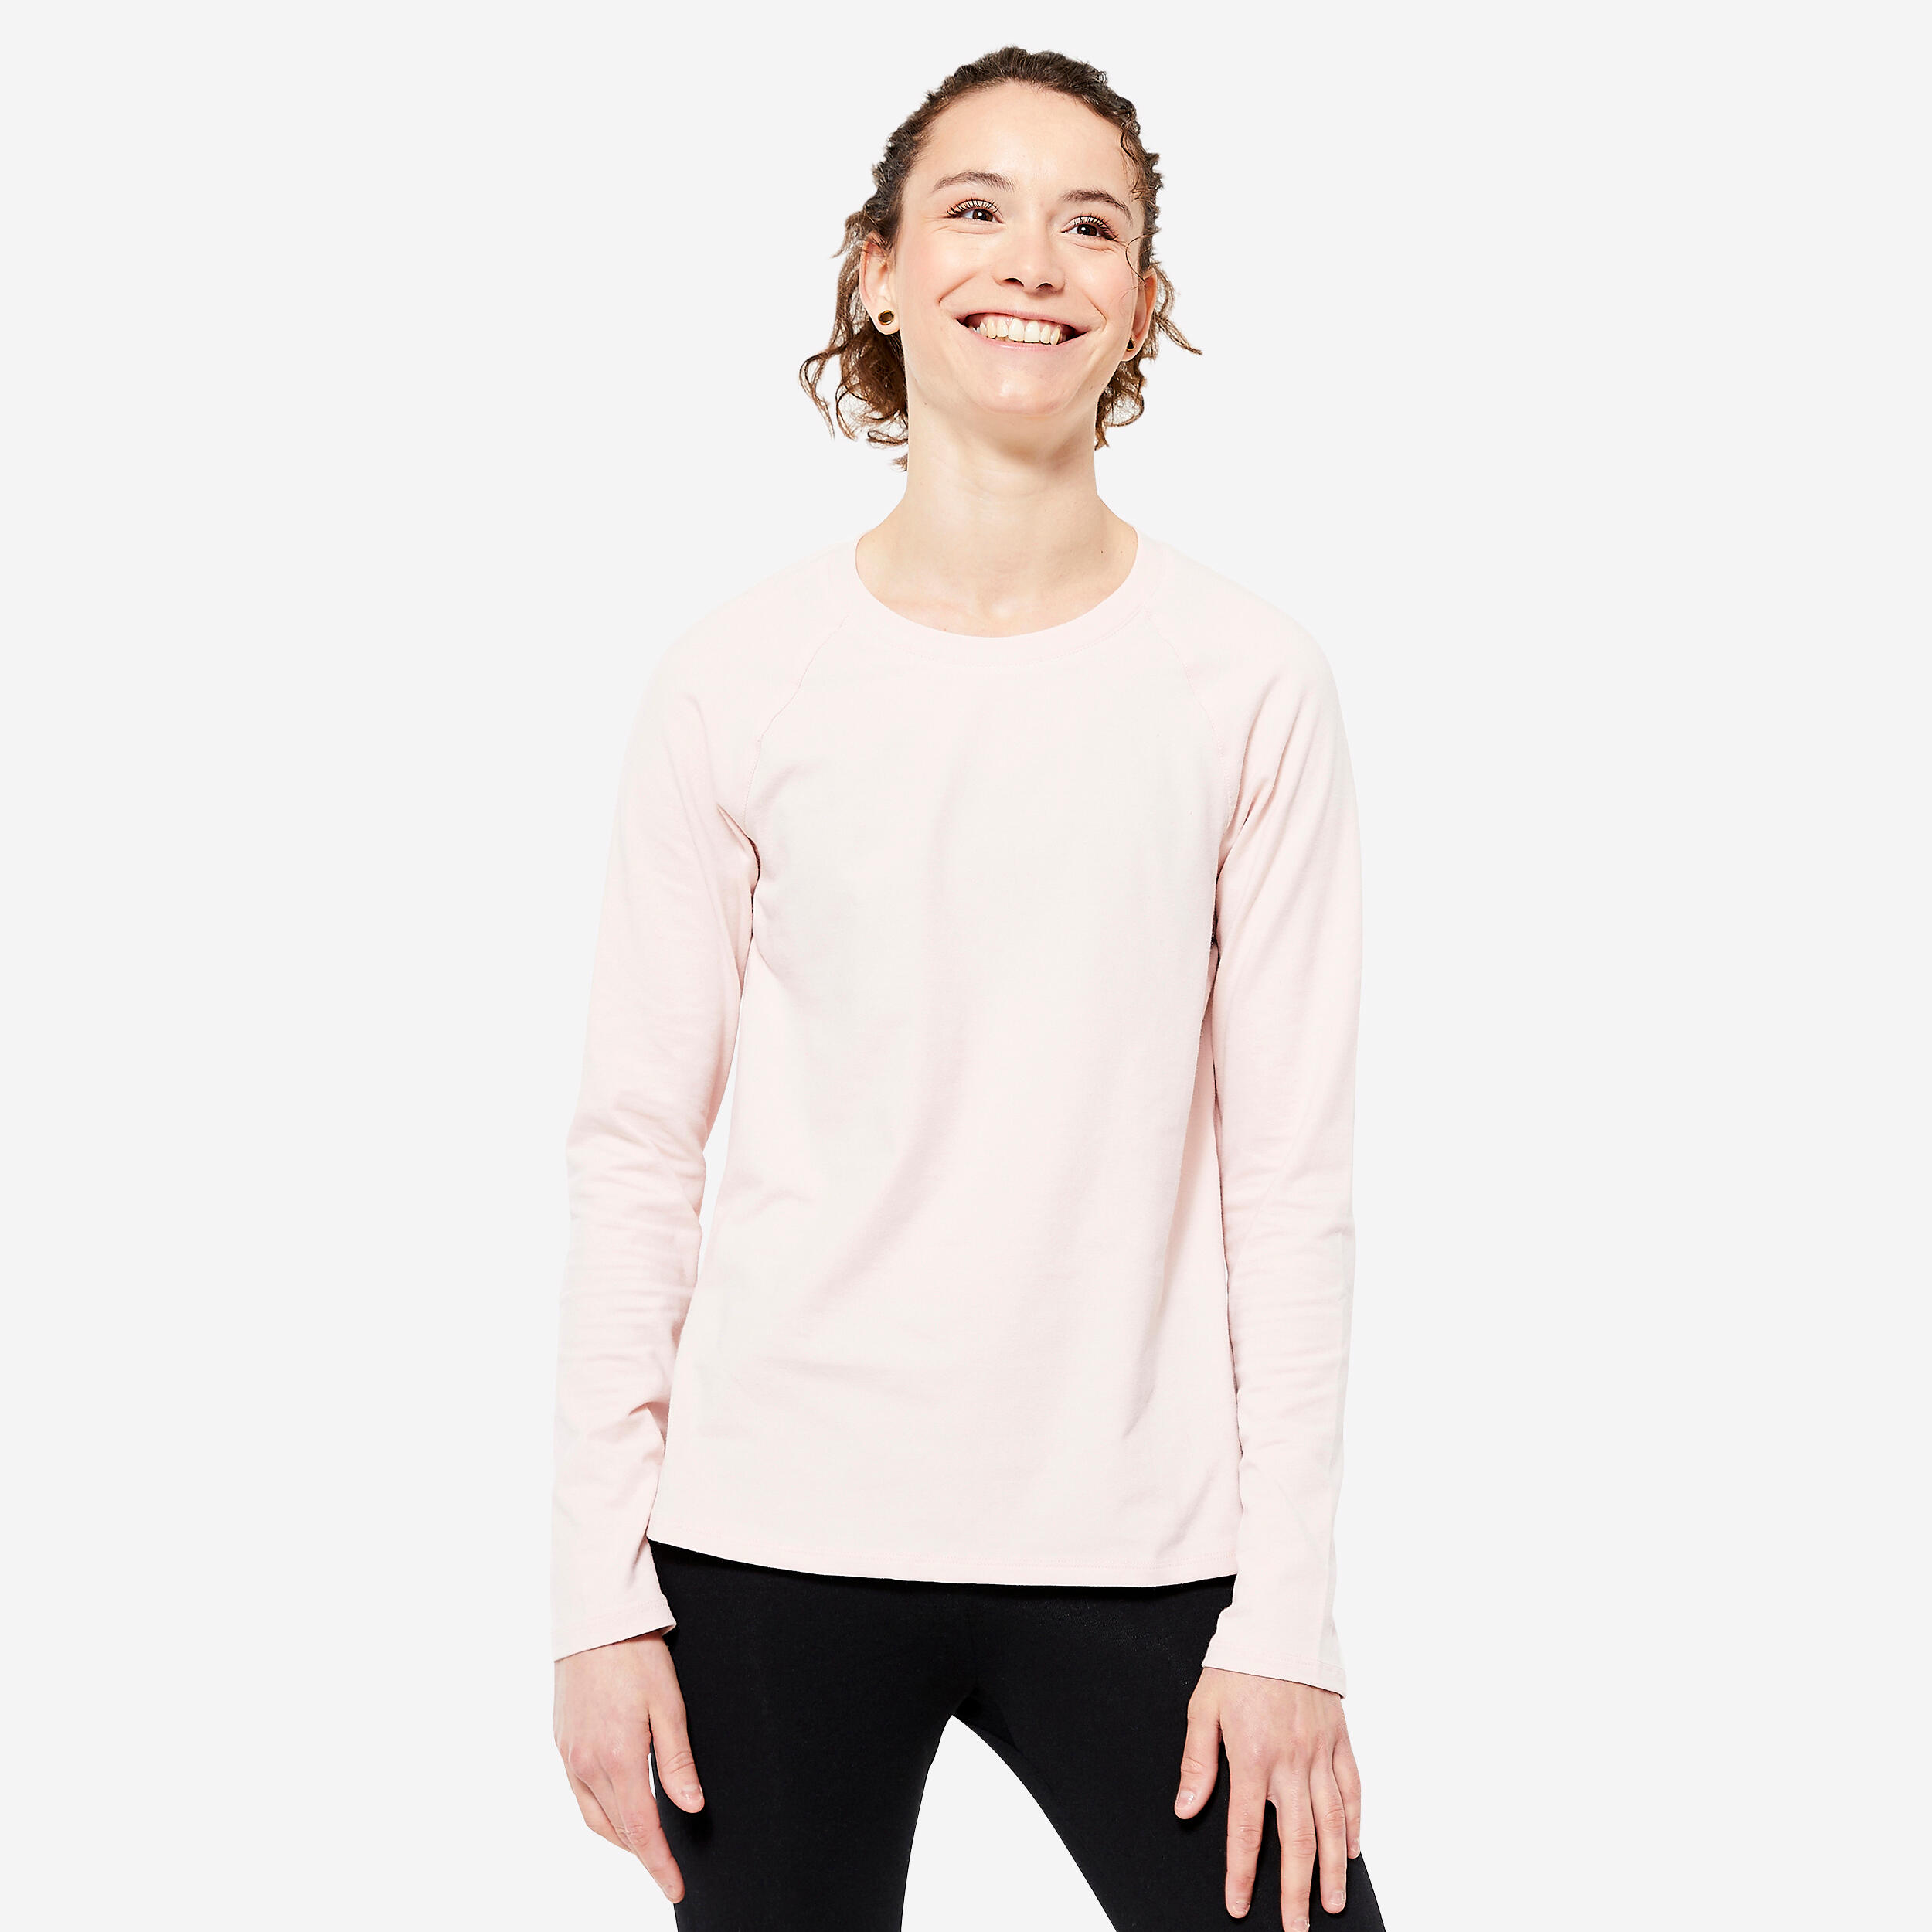 DOMYOS Women's Long-Sleeved Fitness T-Shirt 500 - Pink